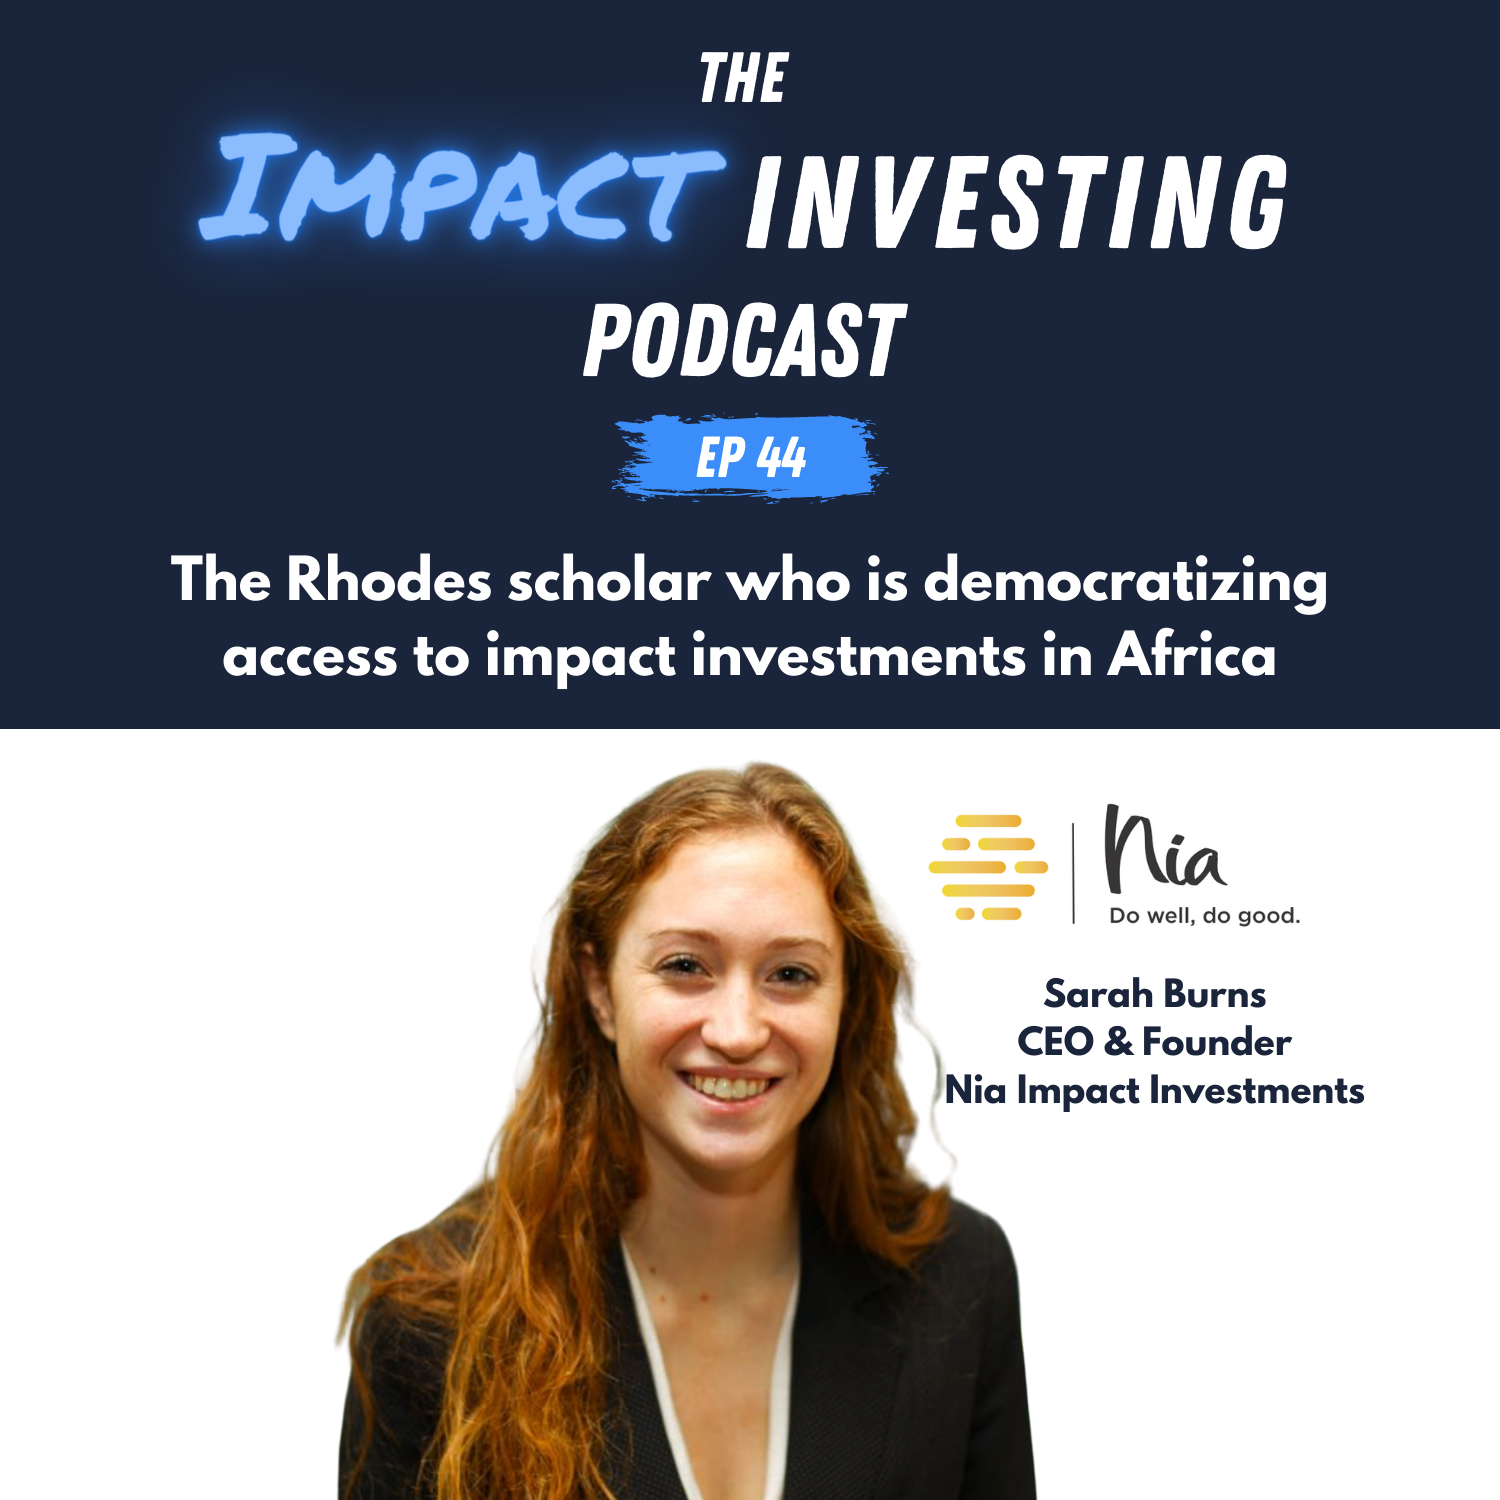 44 - The Rhodes scholar who is democratizing access to impact investments in Africa